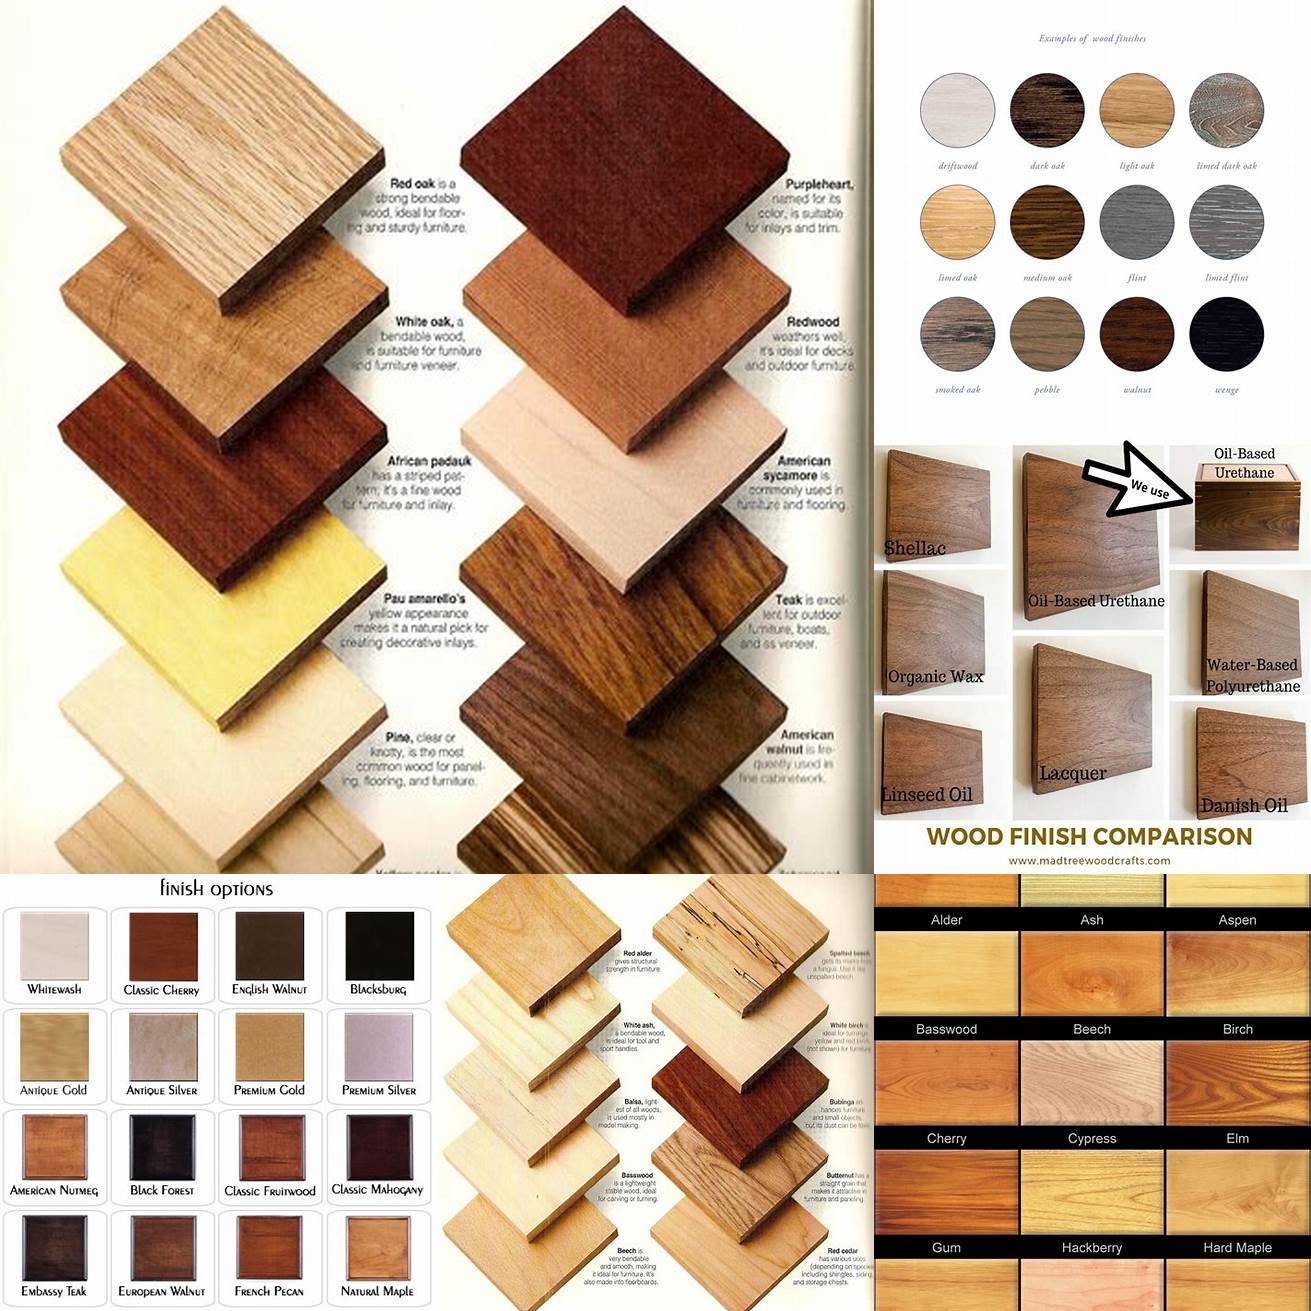 A comparison of different finishes